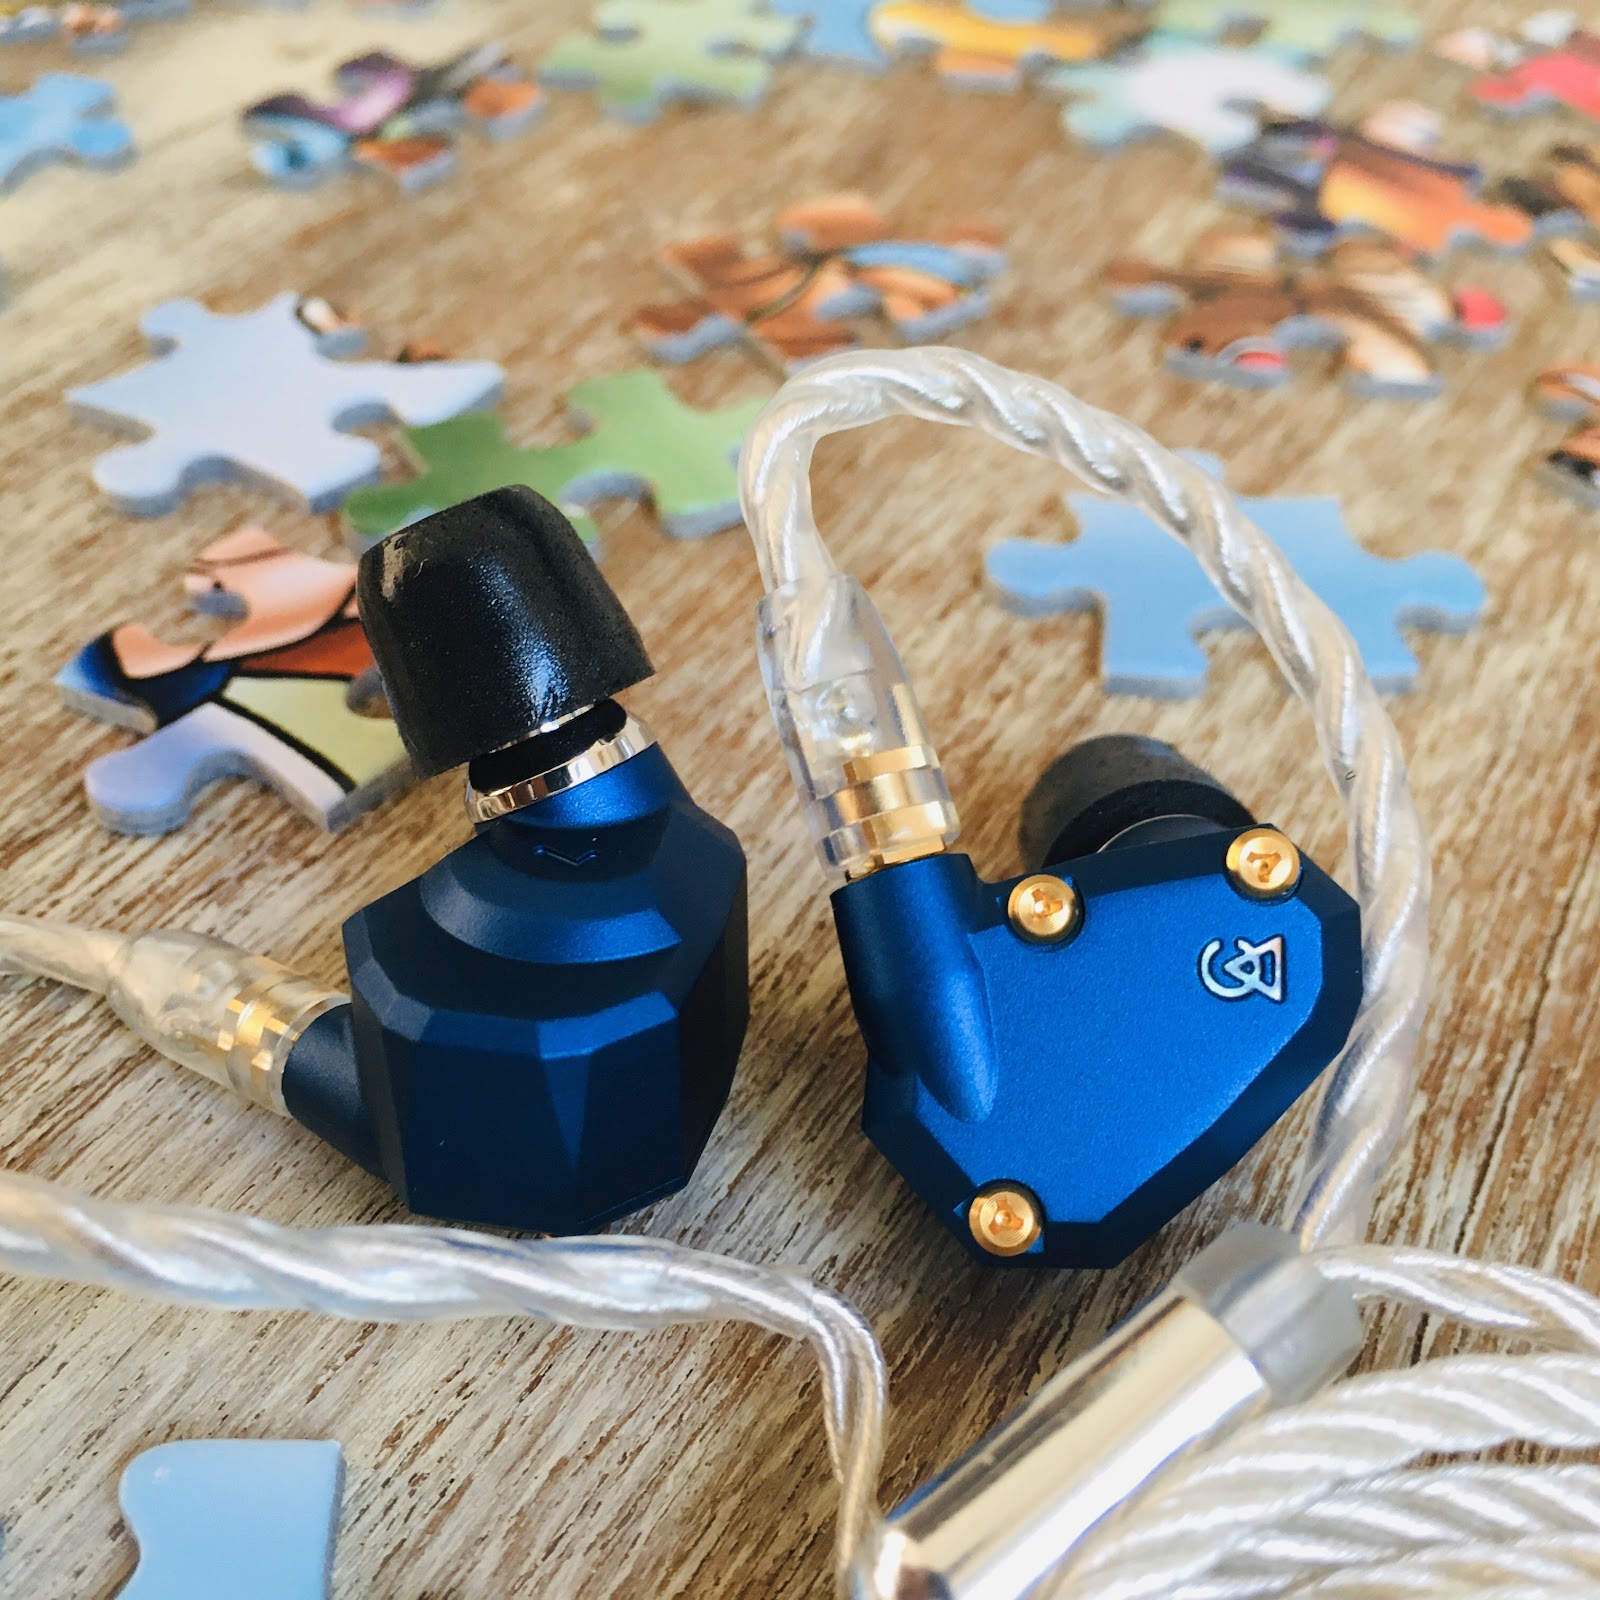 Campfire Audio Andromeda MW10 unboxing